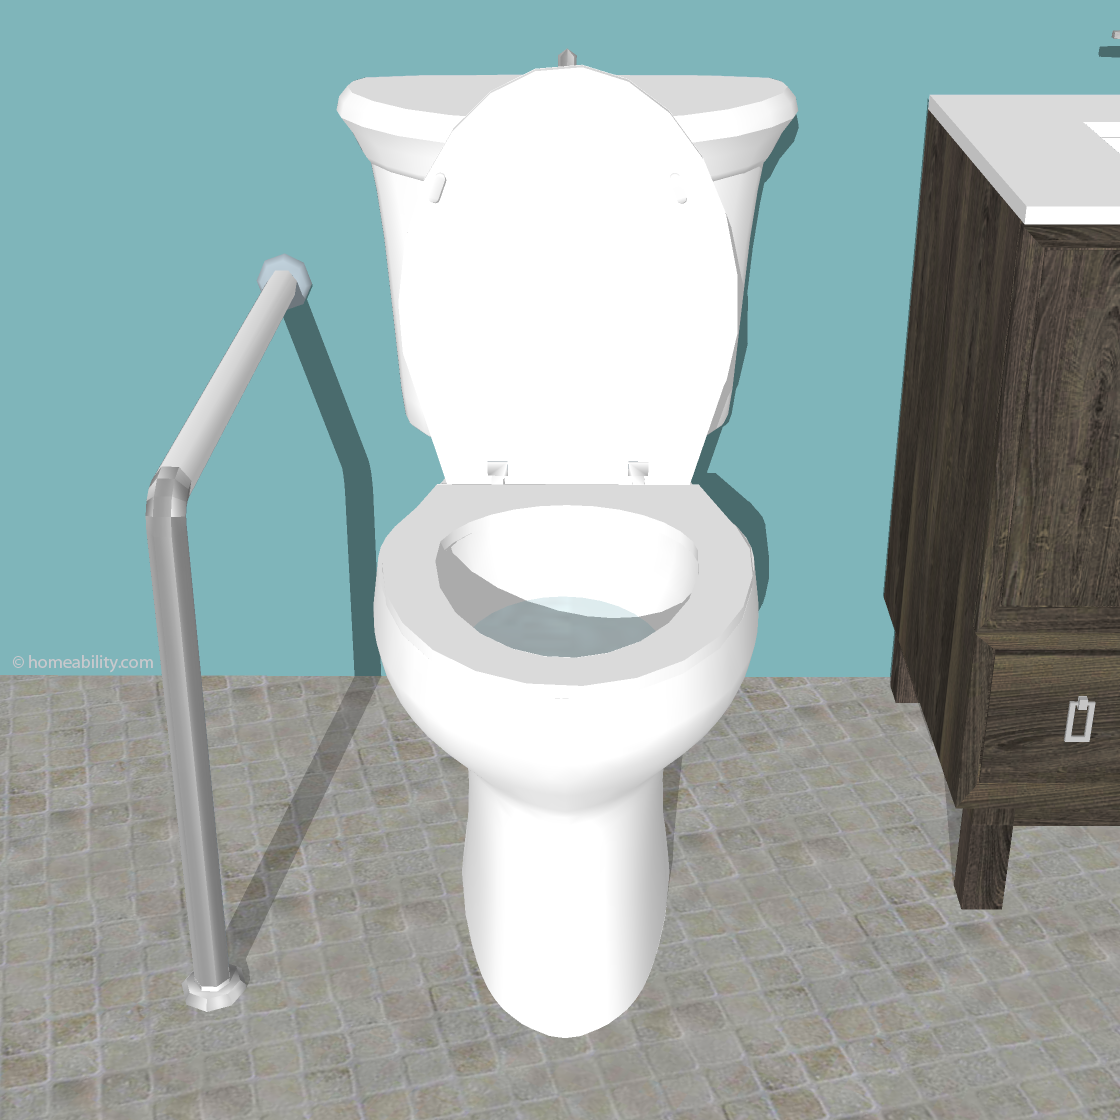 Toilet Rails: Which Type is Best?